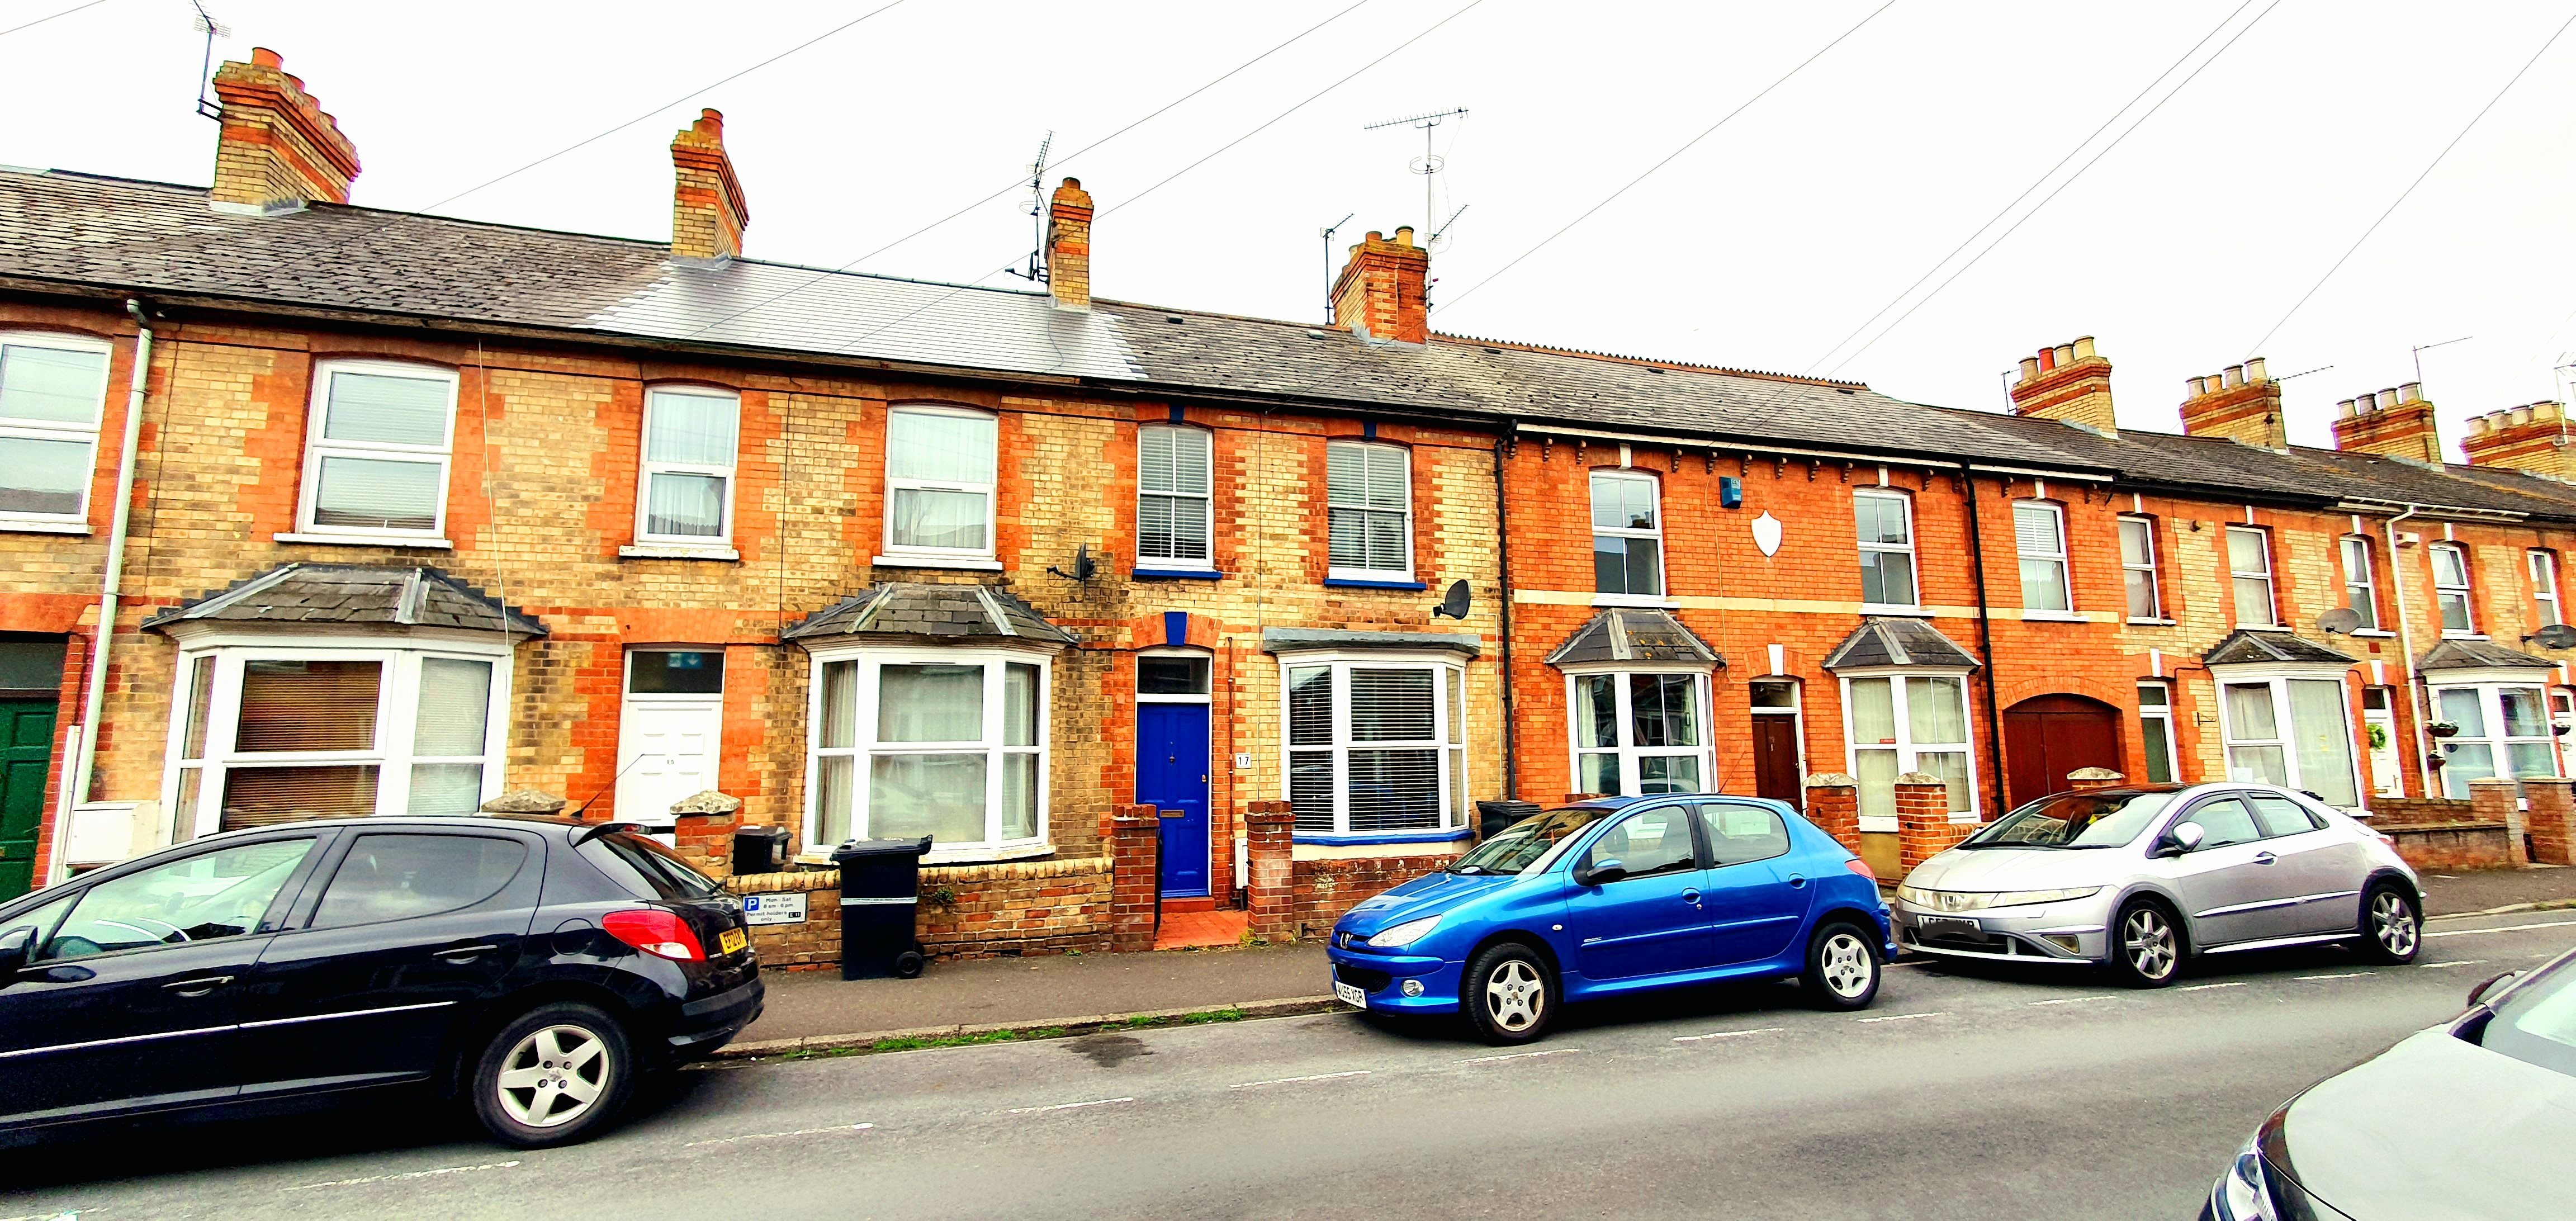 3 bed terraced house to rent in Winchester Street, Taunton, TA1 